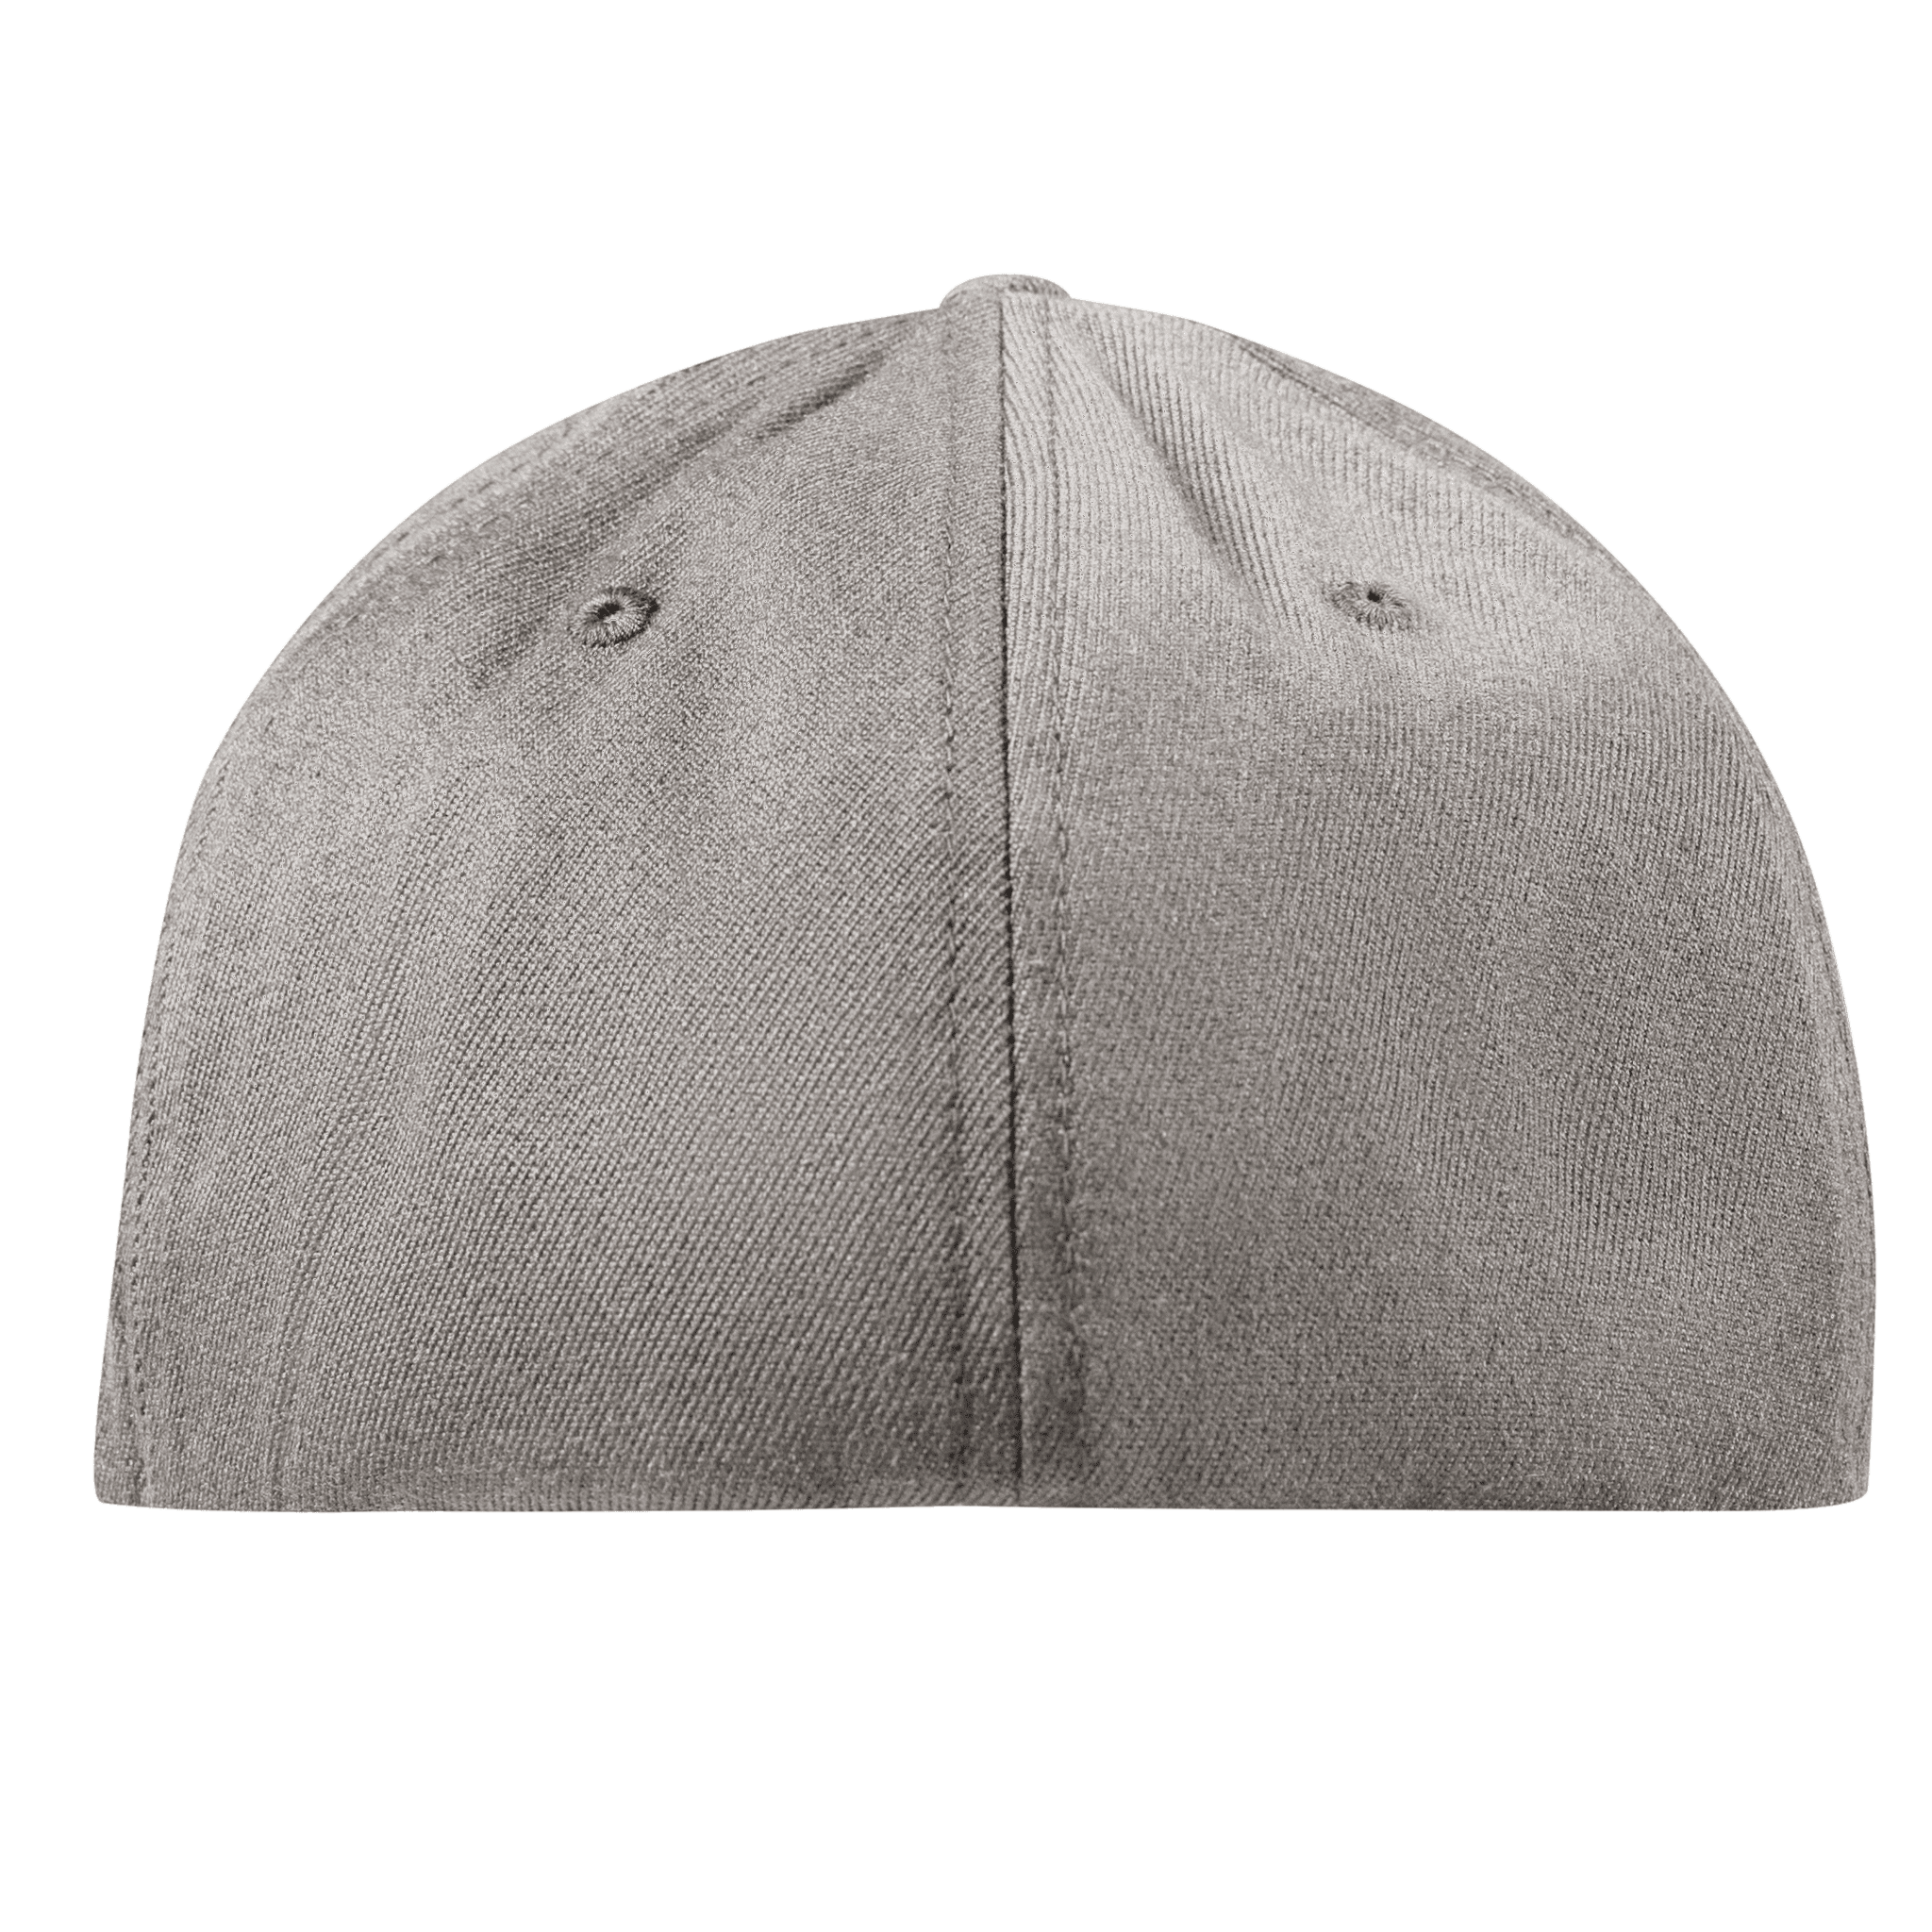 Oklahoma Compass Flexfit Fitted Back Heather Grey